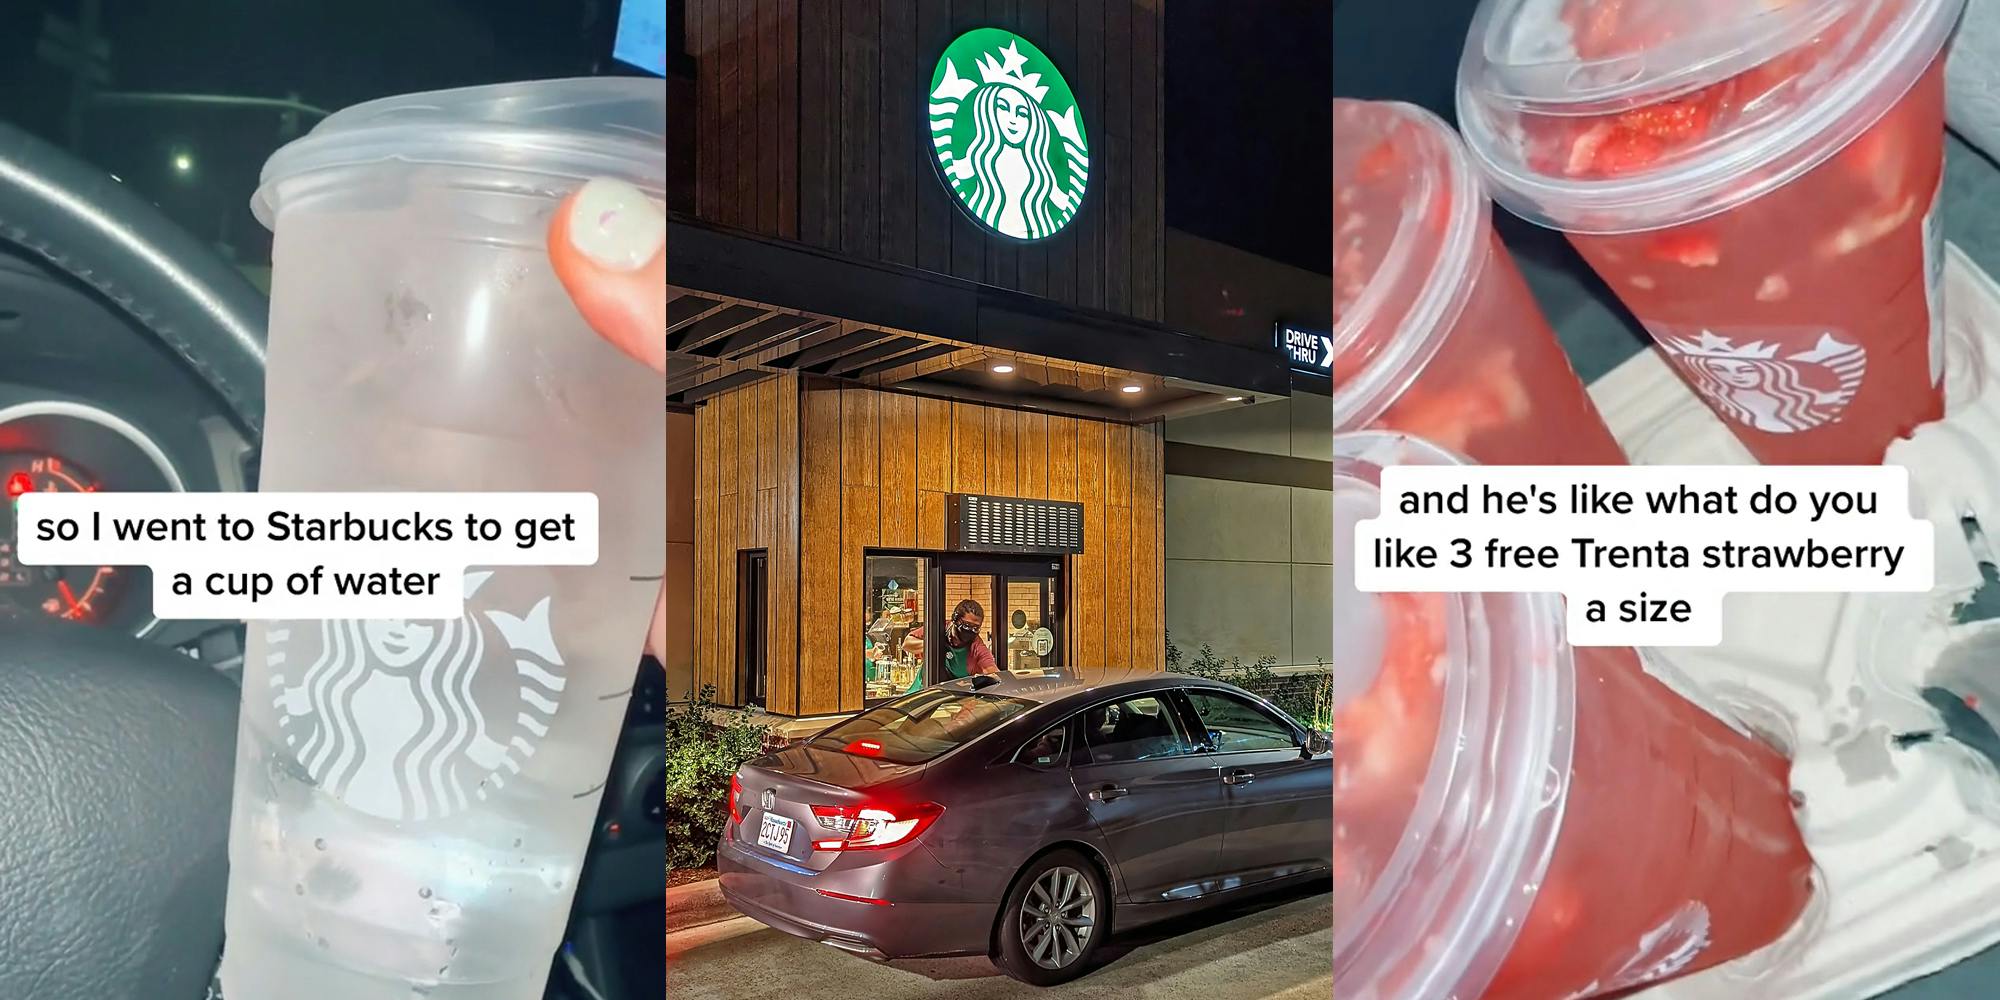 Starbucks customer holding water in car with caption "so I went to Starbucks to get a cup of water" (l) Starbucks drive thru at night with sign (c) Starbucks drinks in carrier with caption "and he's like what do you like 3 free Trenta strawberry a size" (r)